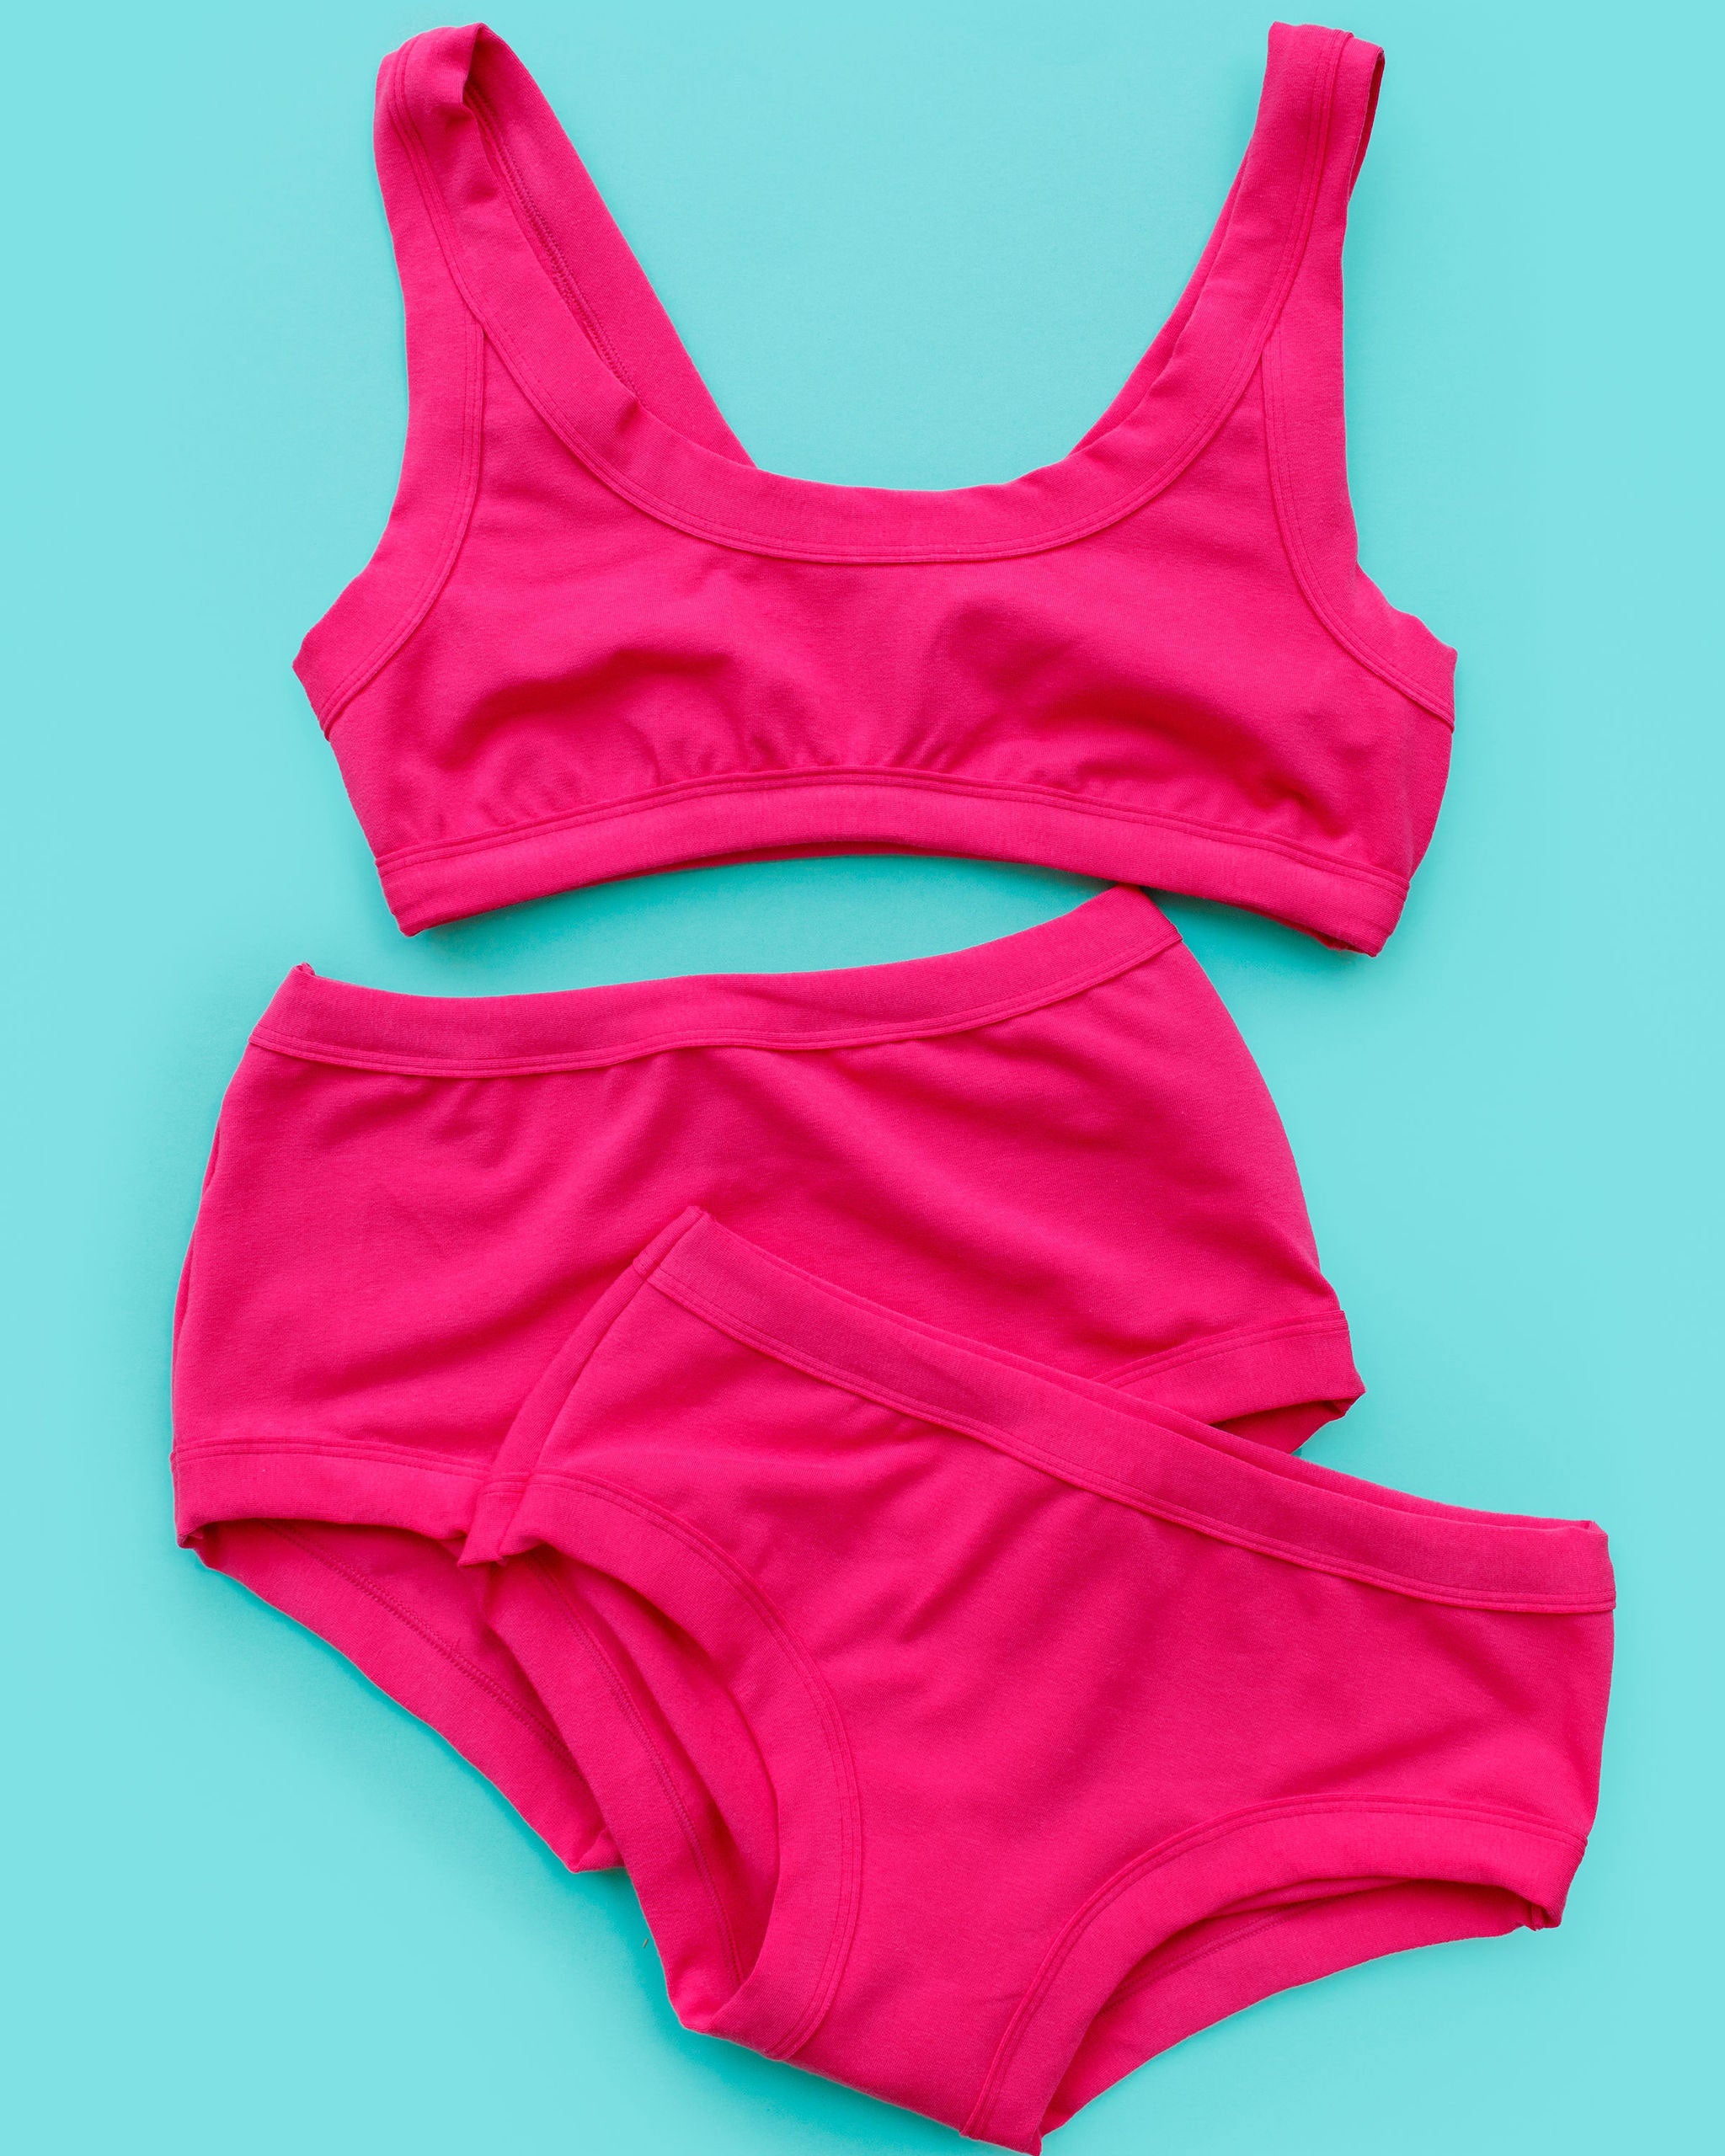 Flat lay of Thunderpants Bralette, Original style and Hipster style underwear in a hot pink color.